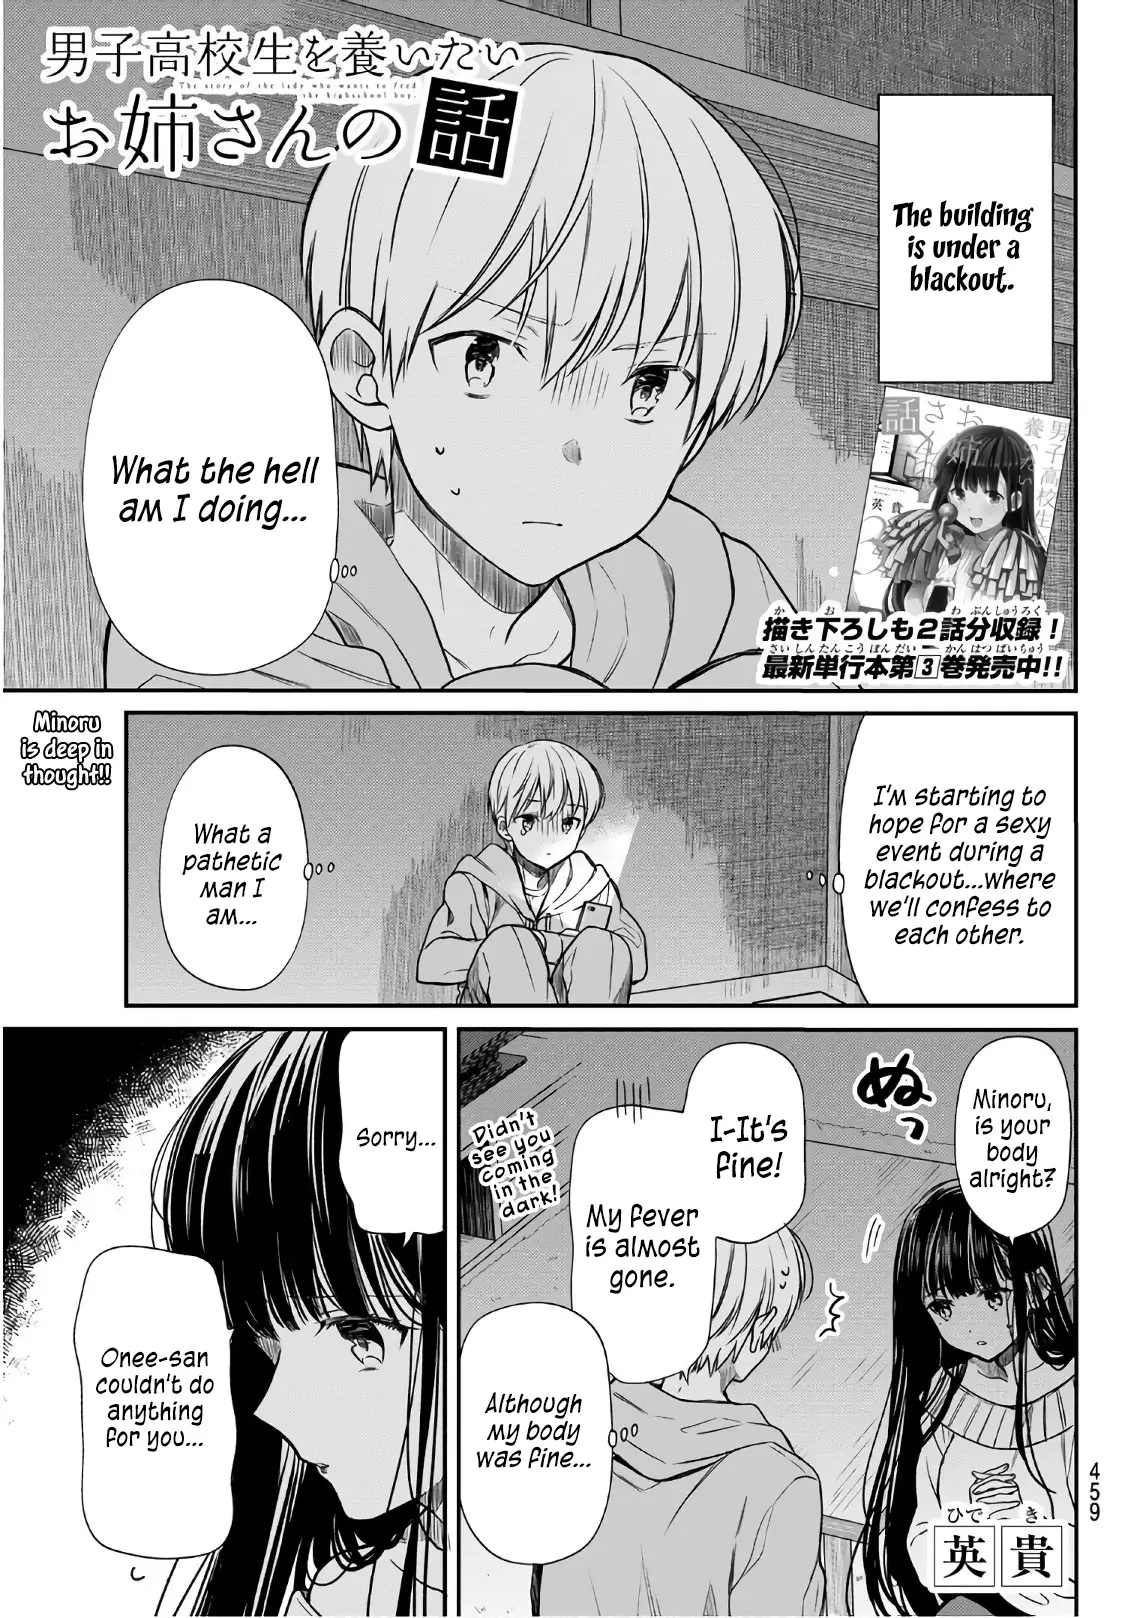 The Story Of An Onee-San Who Wants To Keep A High School Boy - 108 page 2